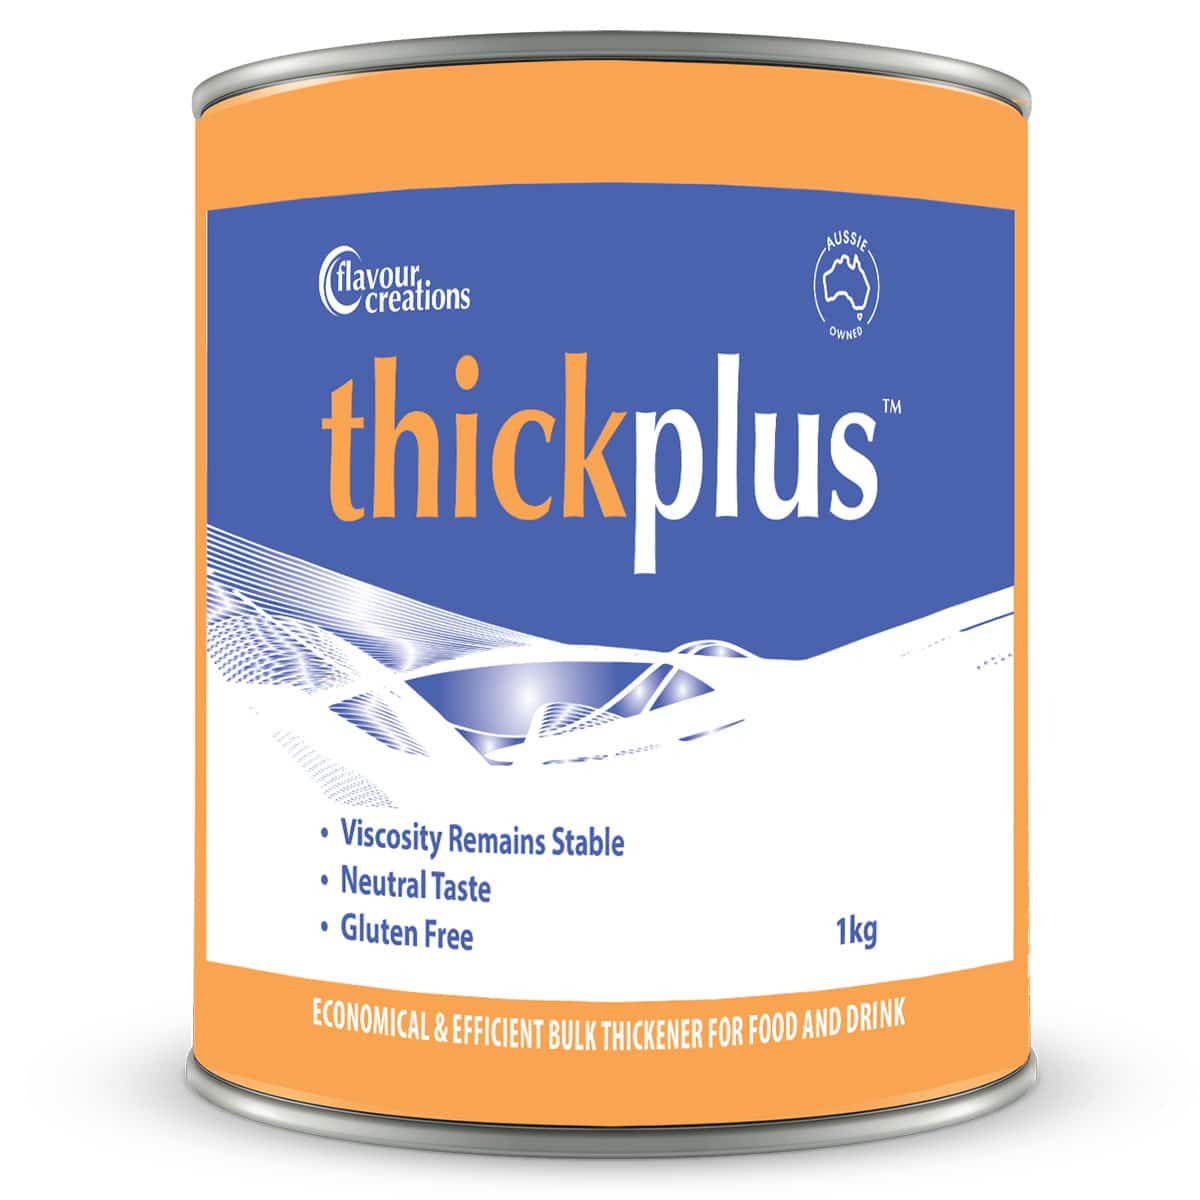 Flavour Creations Thick Plus Thickening Powder - 1kg